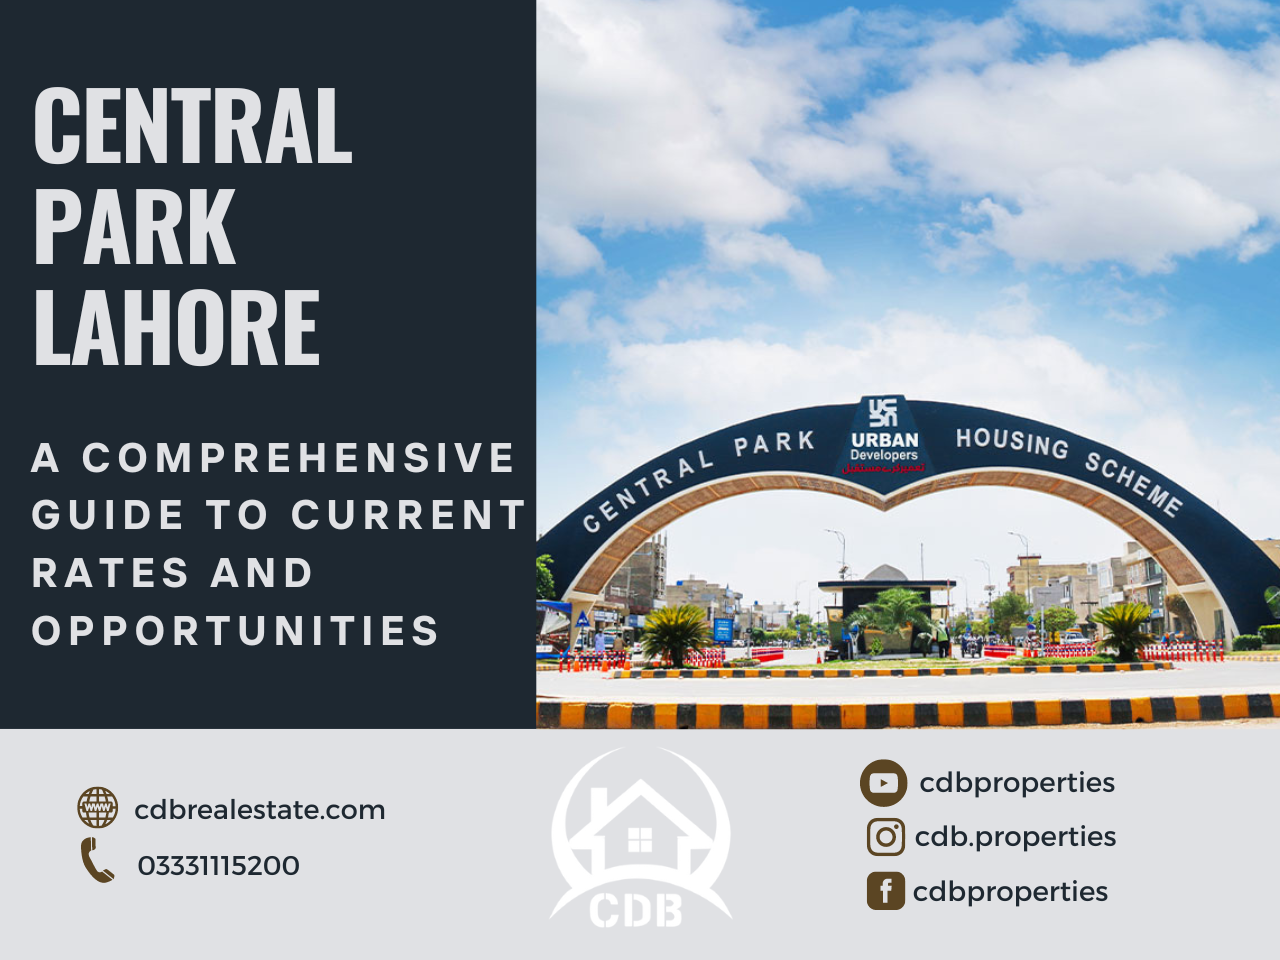 Central Park Lahore: A Comprehensive Guide to Current Rates and Opportunities